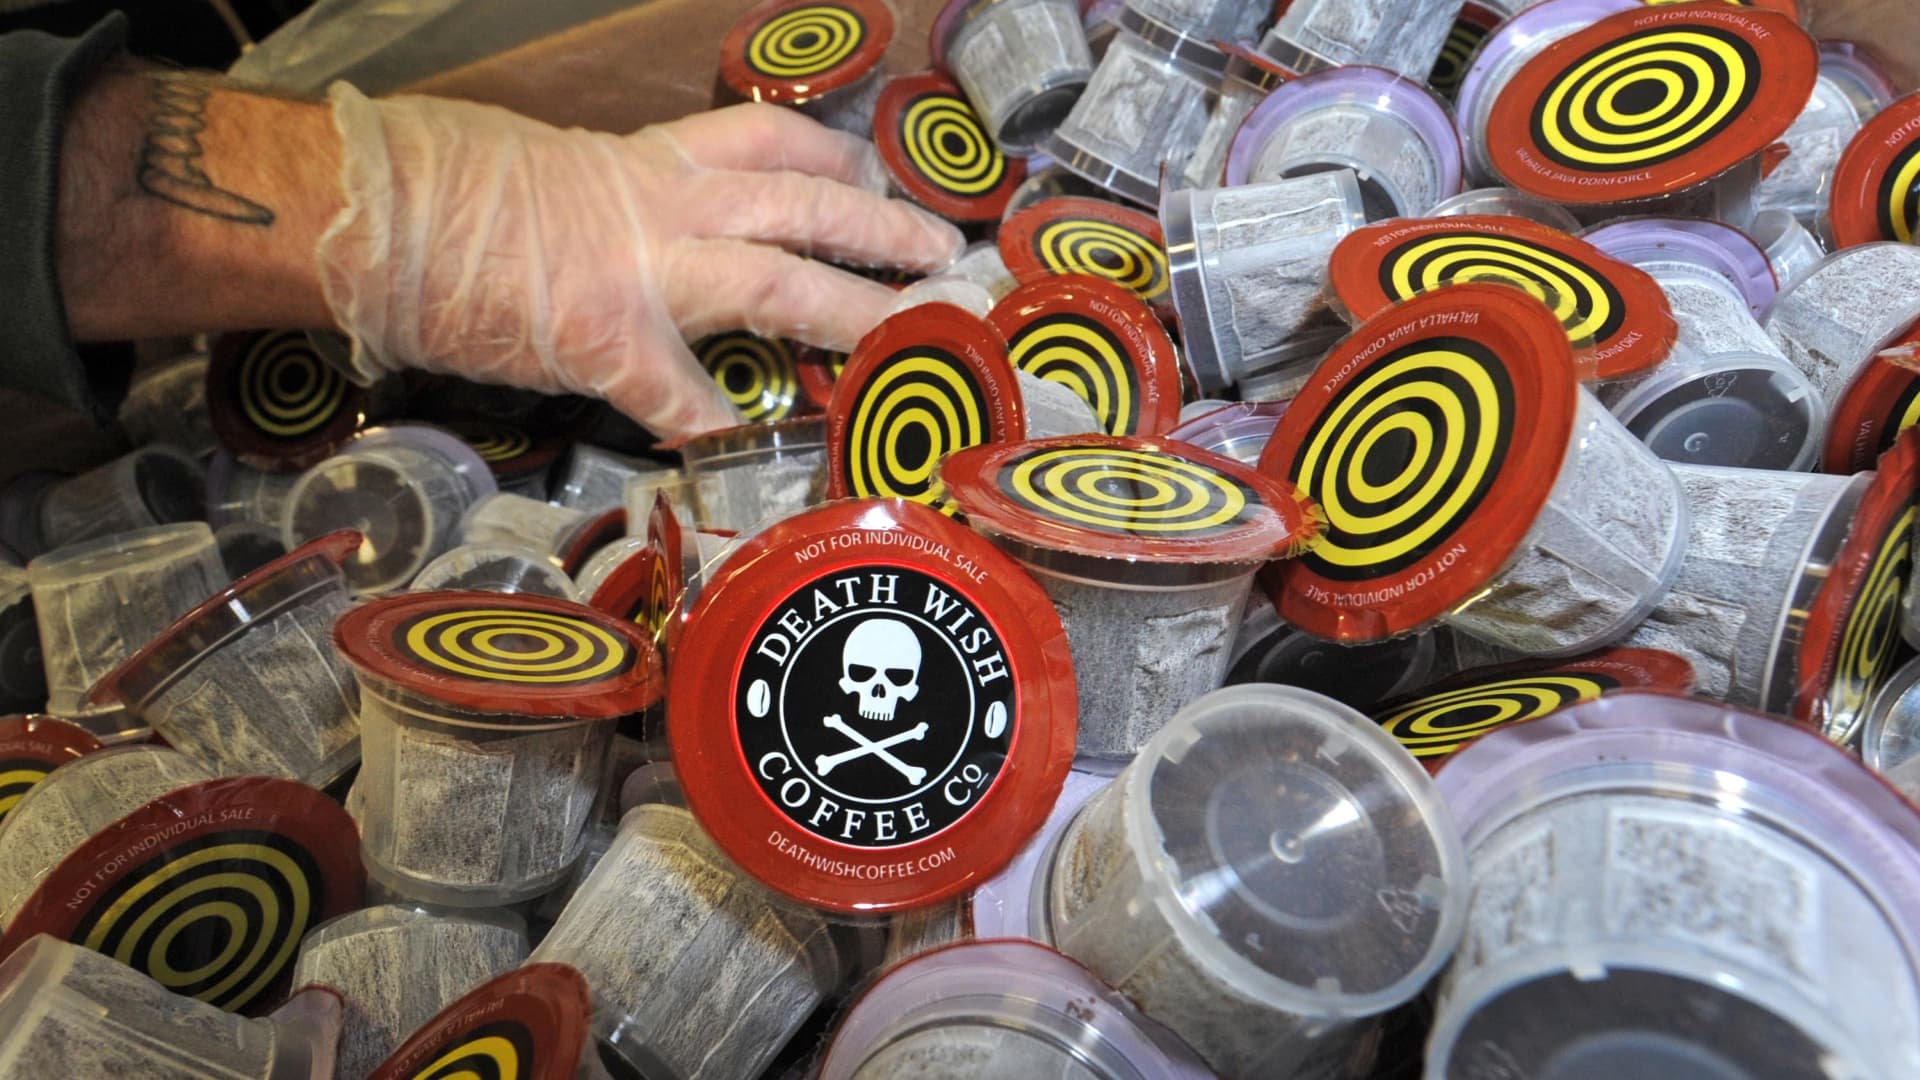 Nespresso, Keurig have new coffee pods coming designed to put an end to all the garbage